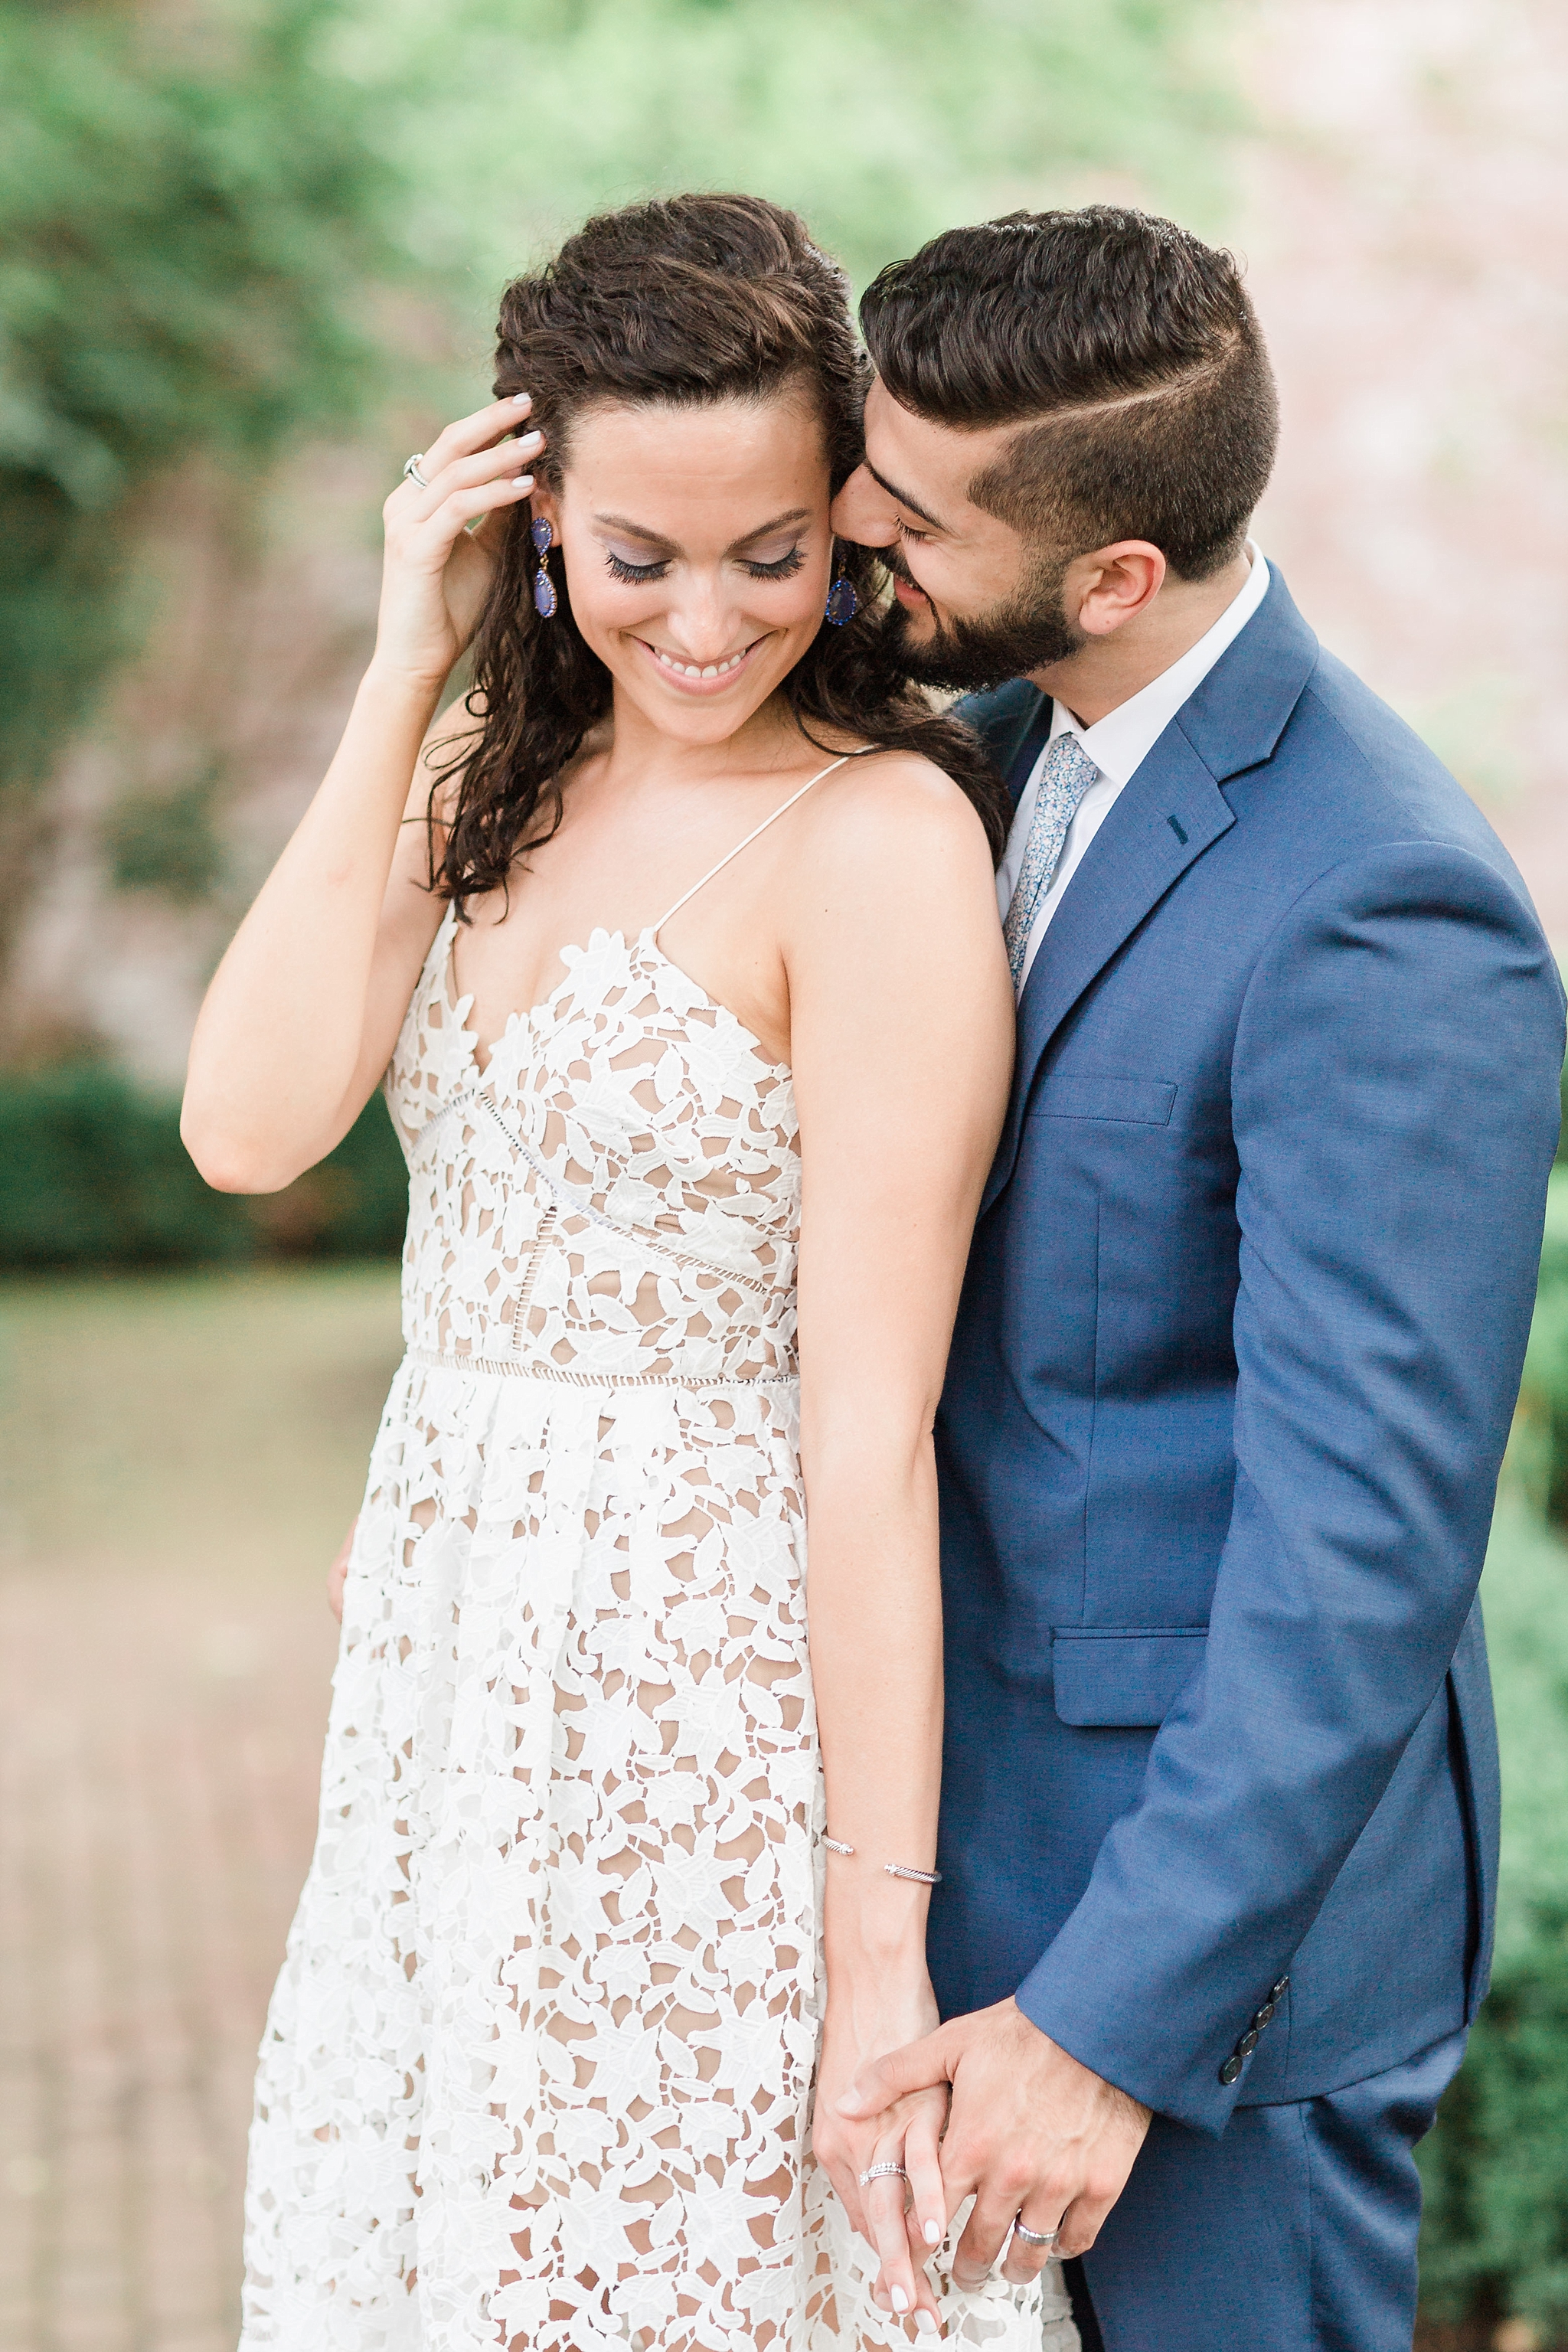 This romantic and intimate Old Town Alexandria elopement was photographed by Washington, DC wedding photographer Alicia Lacey. 